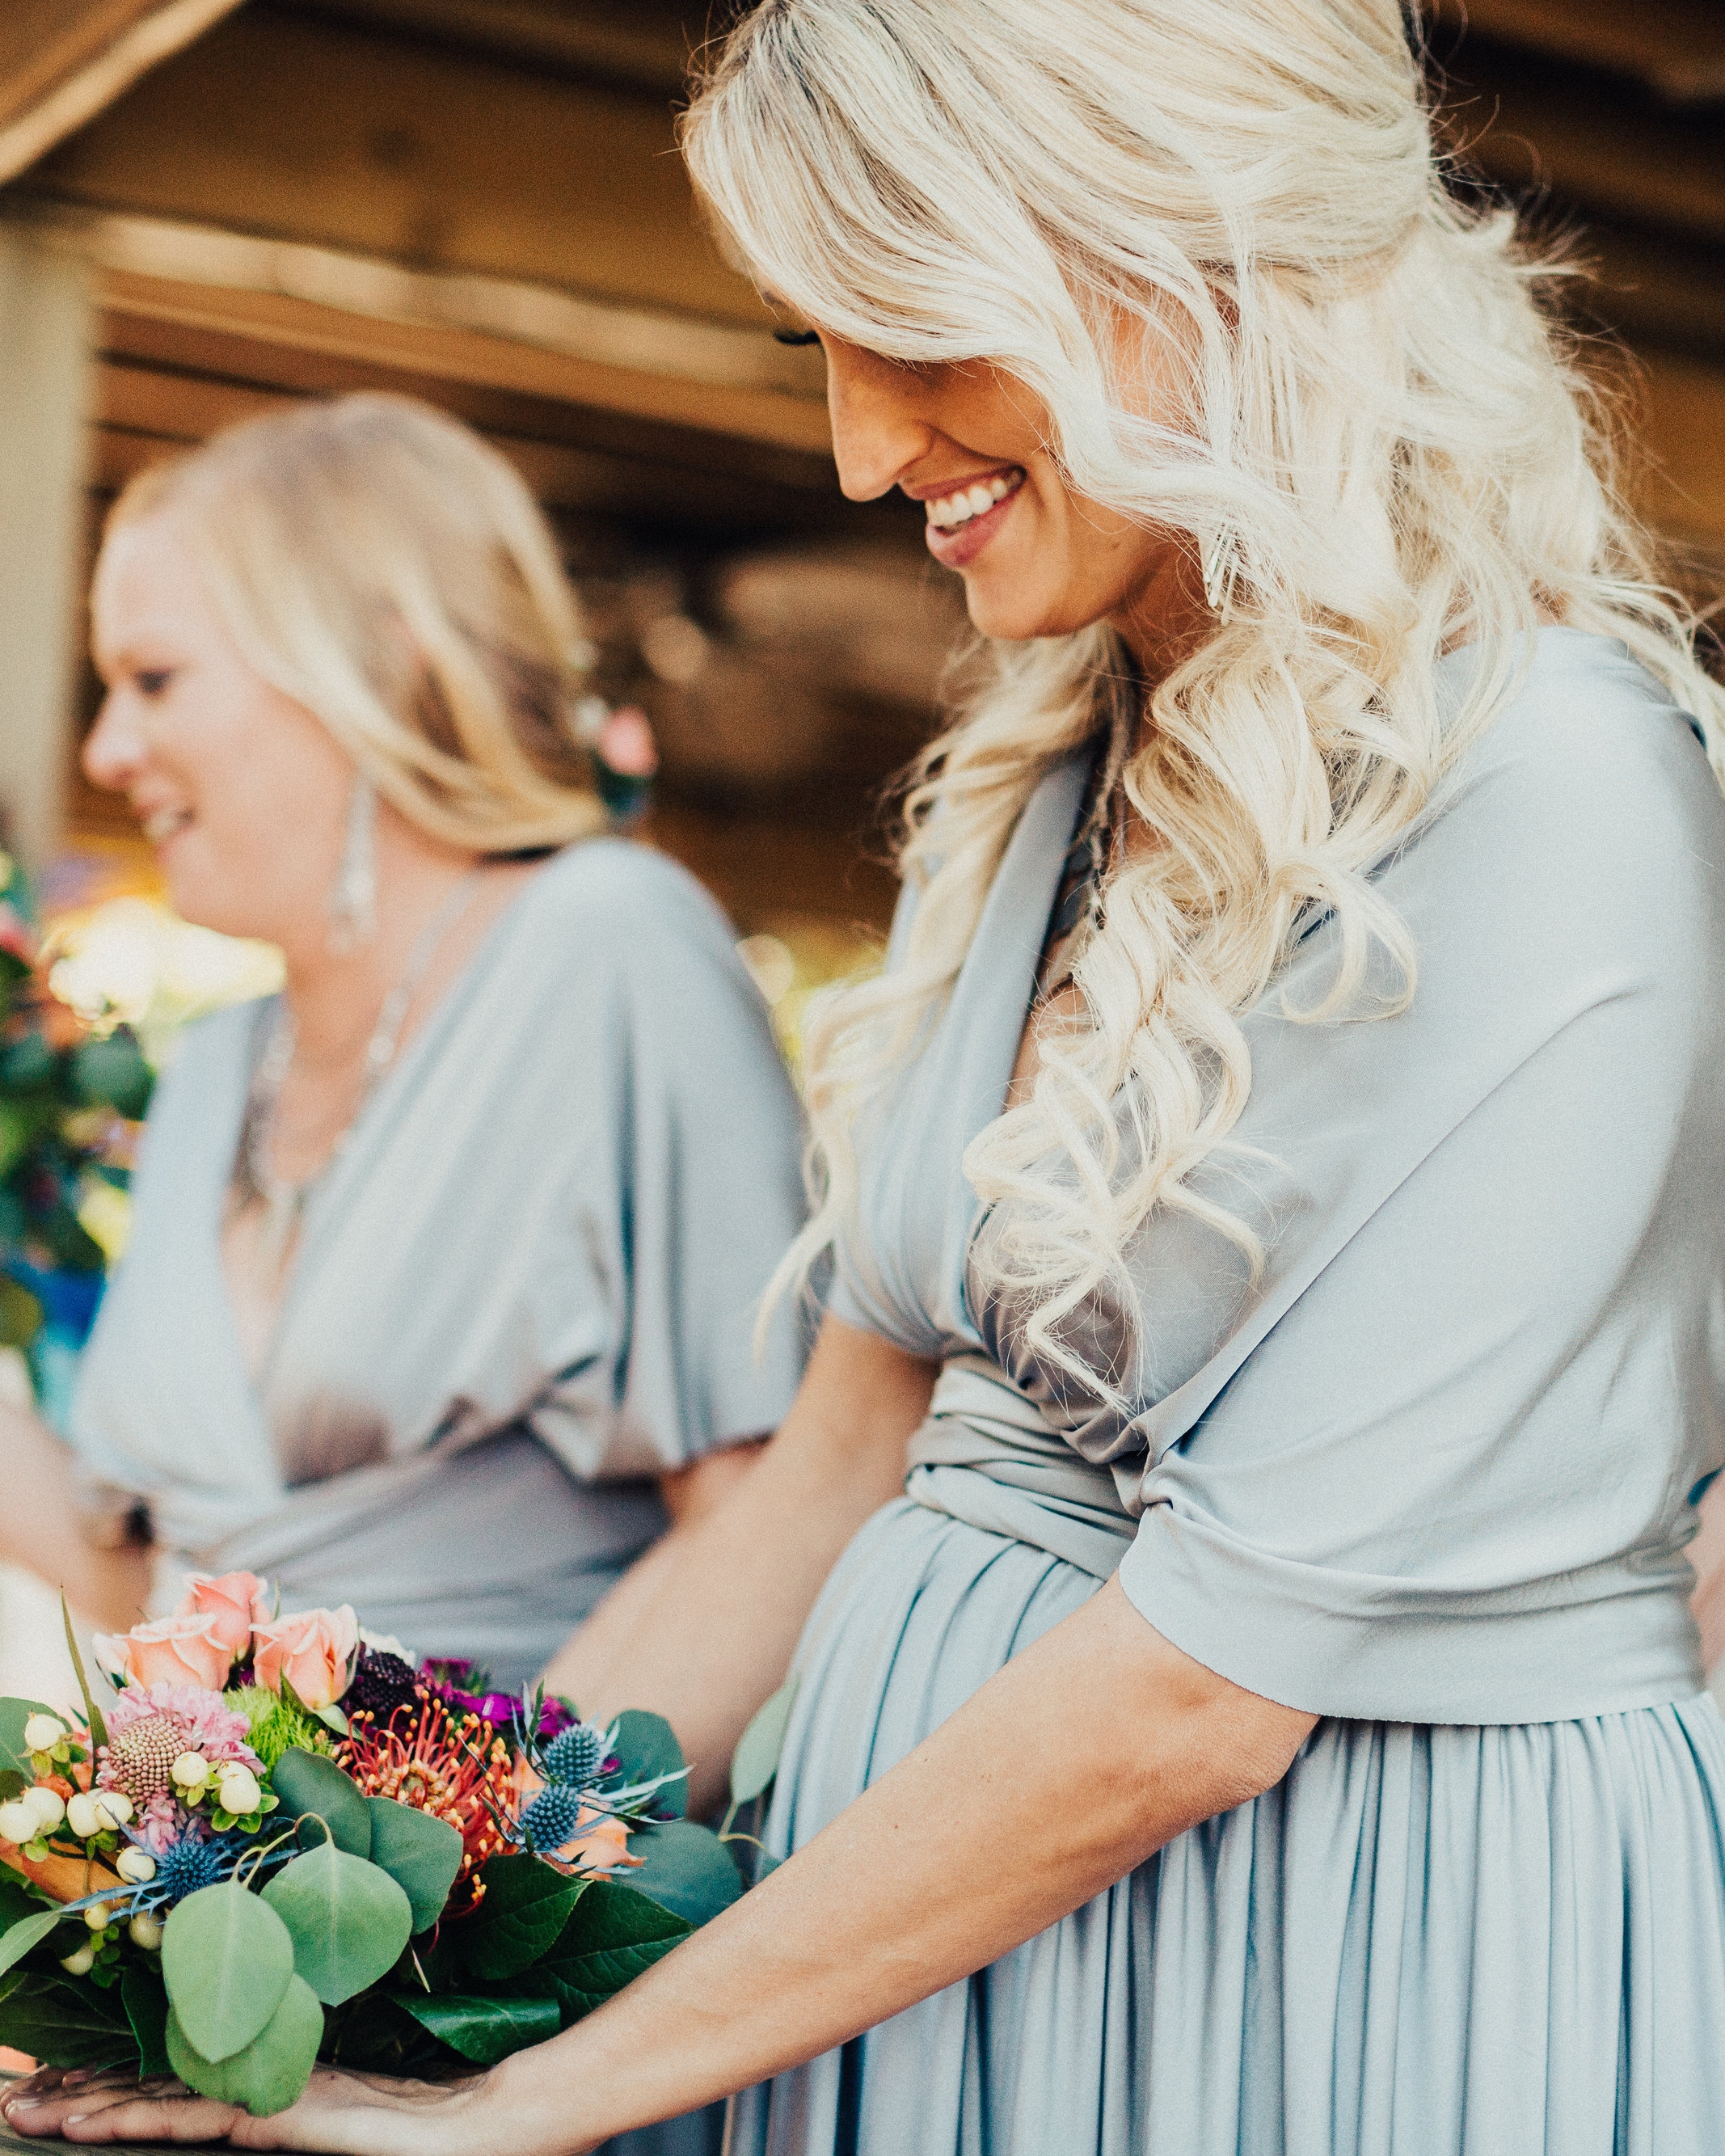 Bridesmaid Dress Shopping: What to Expect